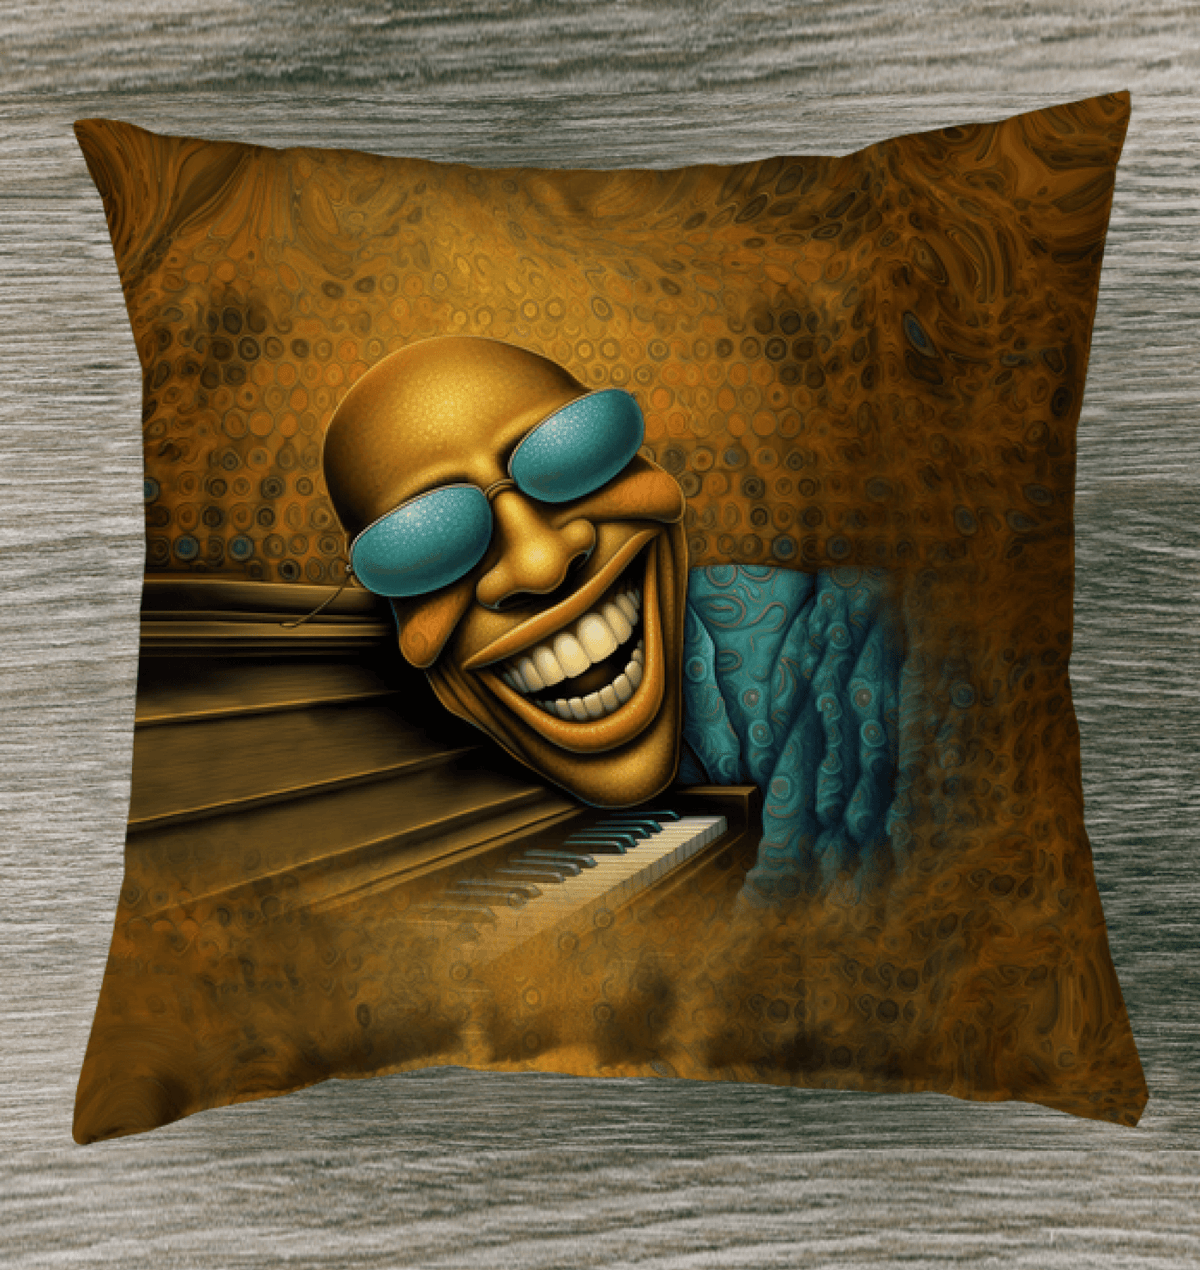 Radiant Reflections IV outdoor decorative pillow.